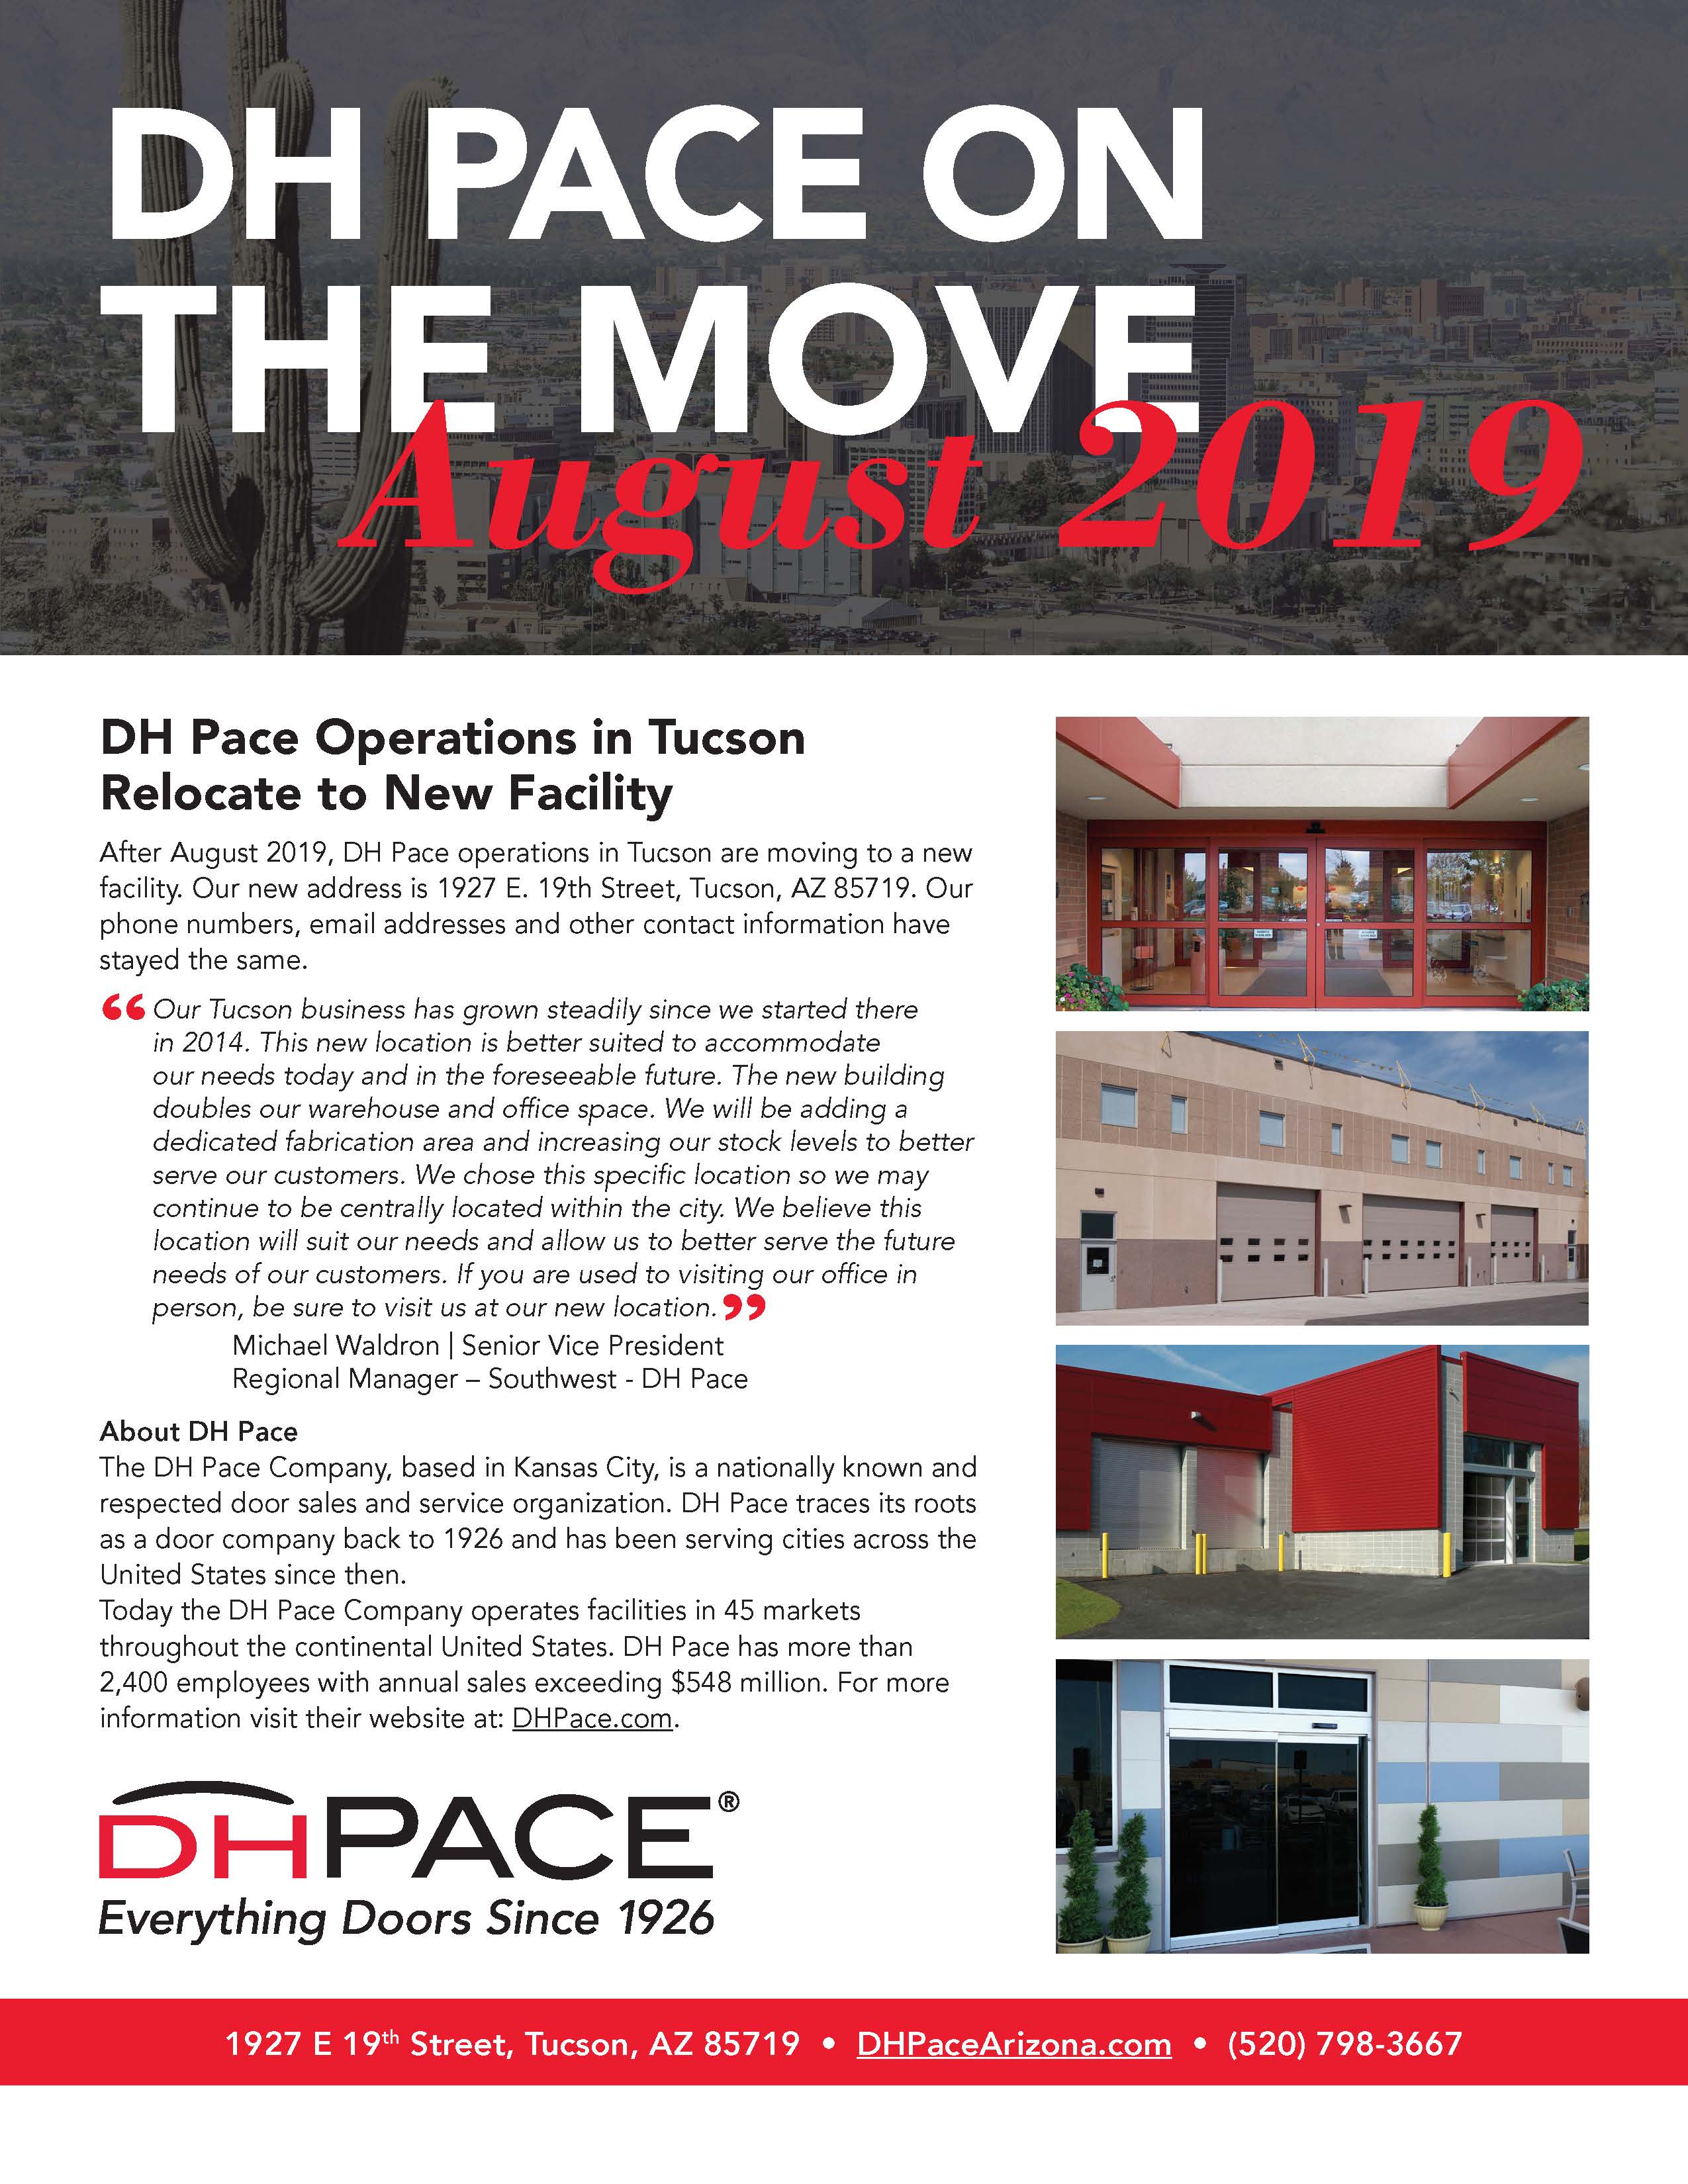 DH Pace Tucson On The Move August 2019